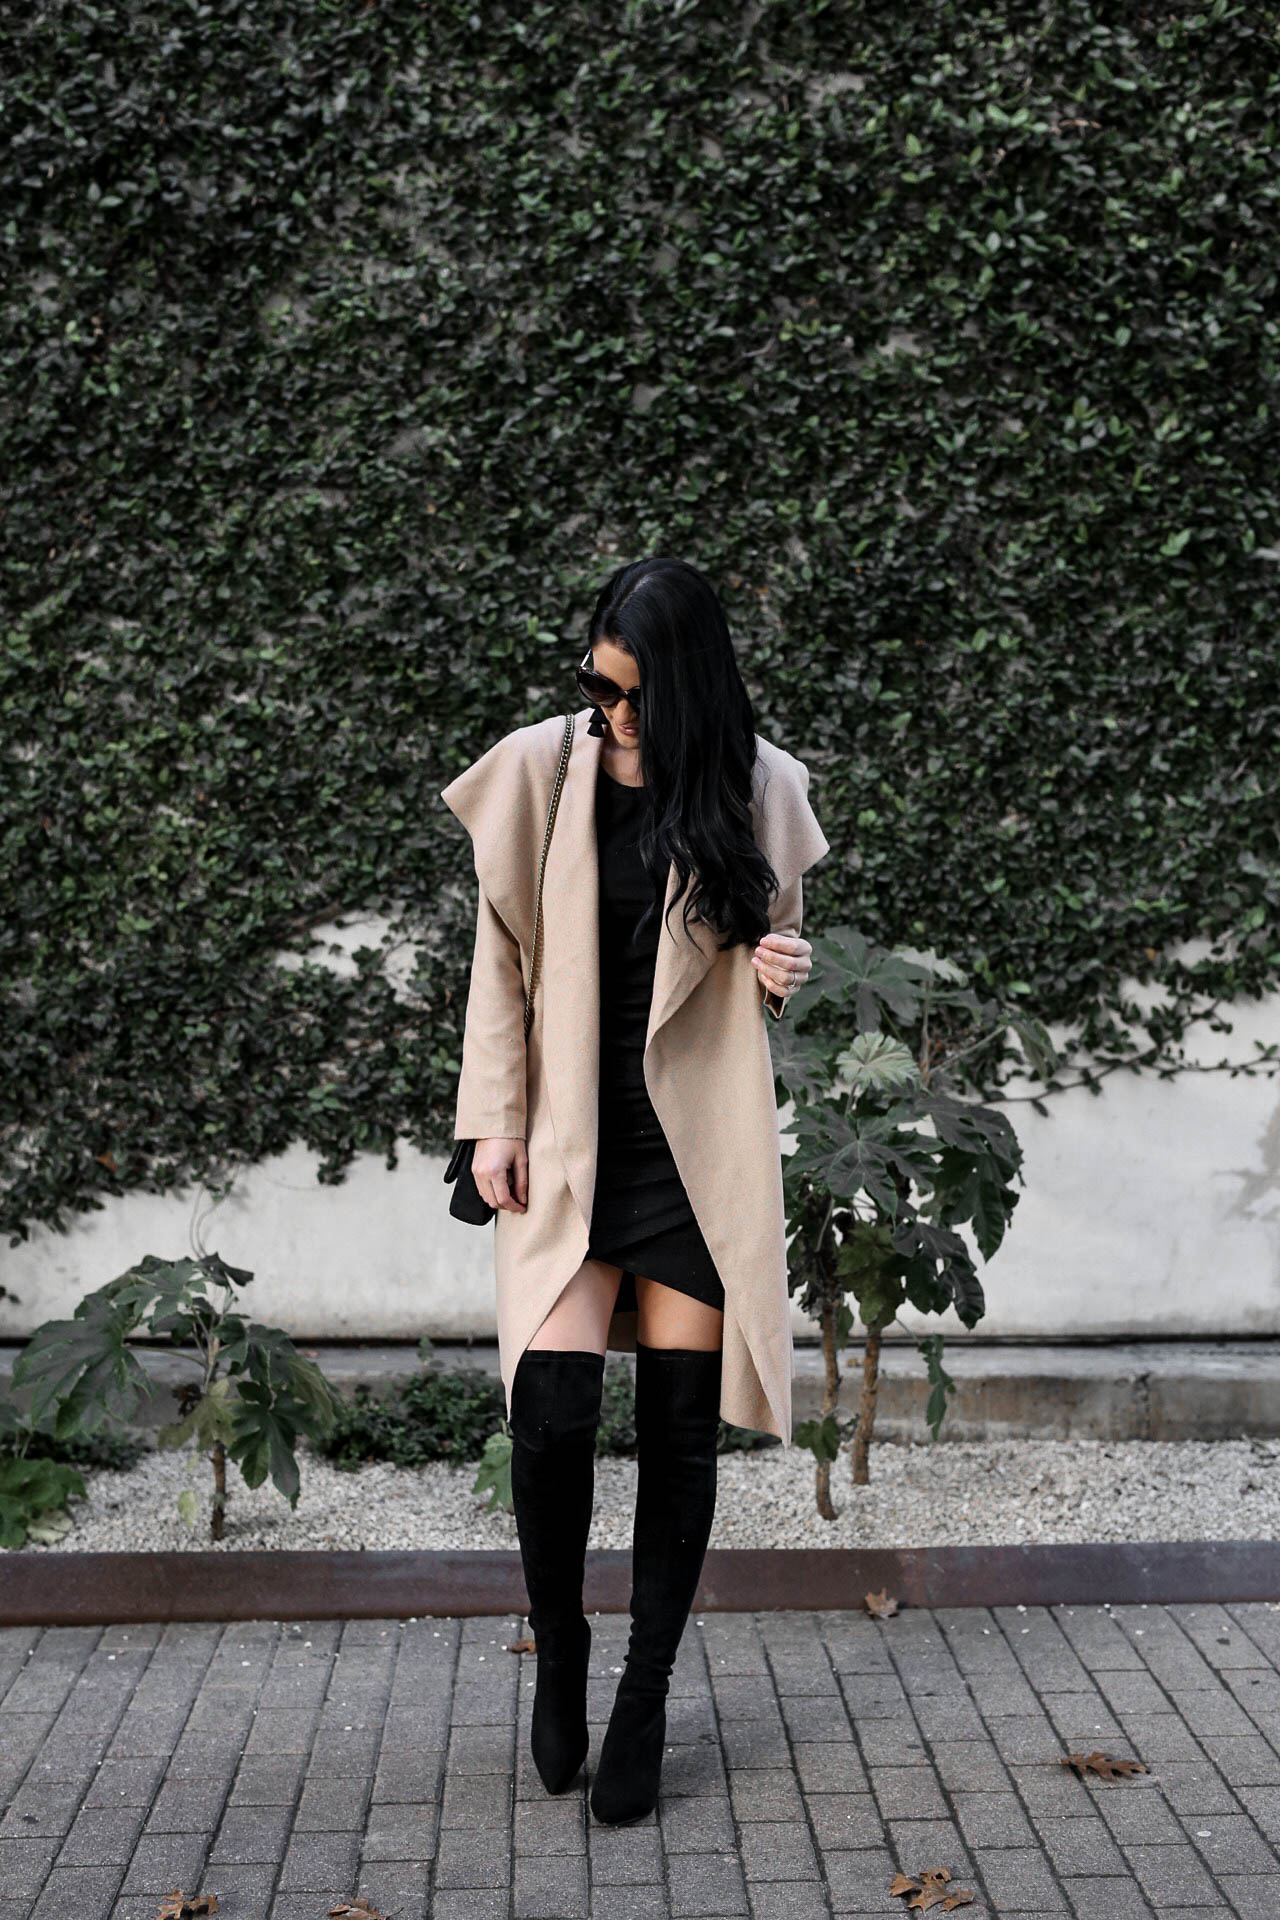 DTKAustin shares her top affordable coats from Chicwish that are under $100. Handbag from Henri Bendel, OTK boots from Goodnight Macaroon. | winter coats for women | how to style winter coats | affordable winter coats | winter style tips | winter fashion tips || Dressed to Kill #wintercoats #affordablewinterfashion #winterfashion - 10 Must-Have Classic Affordable Coats for Winter by Austin fashion blogger Dressed to Kill